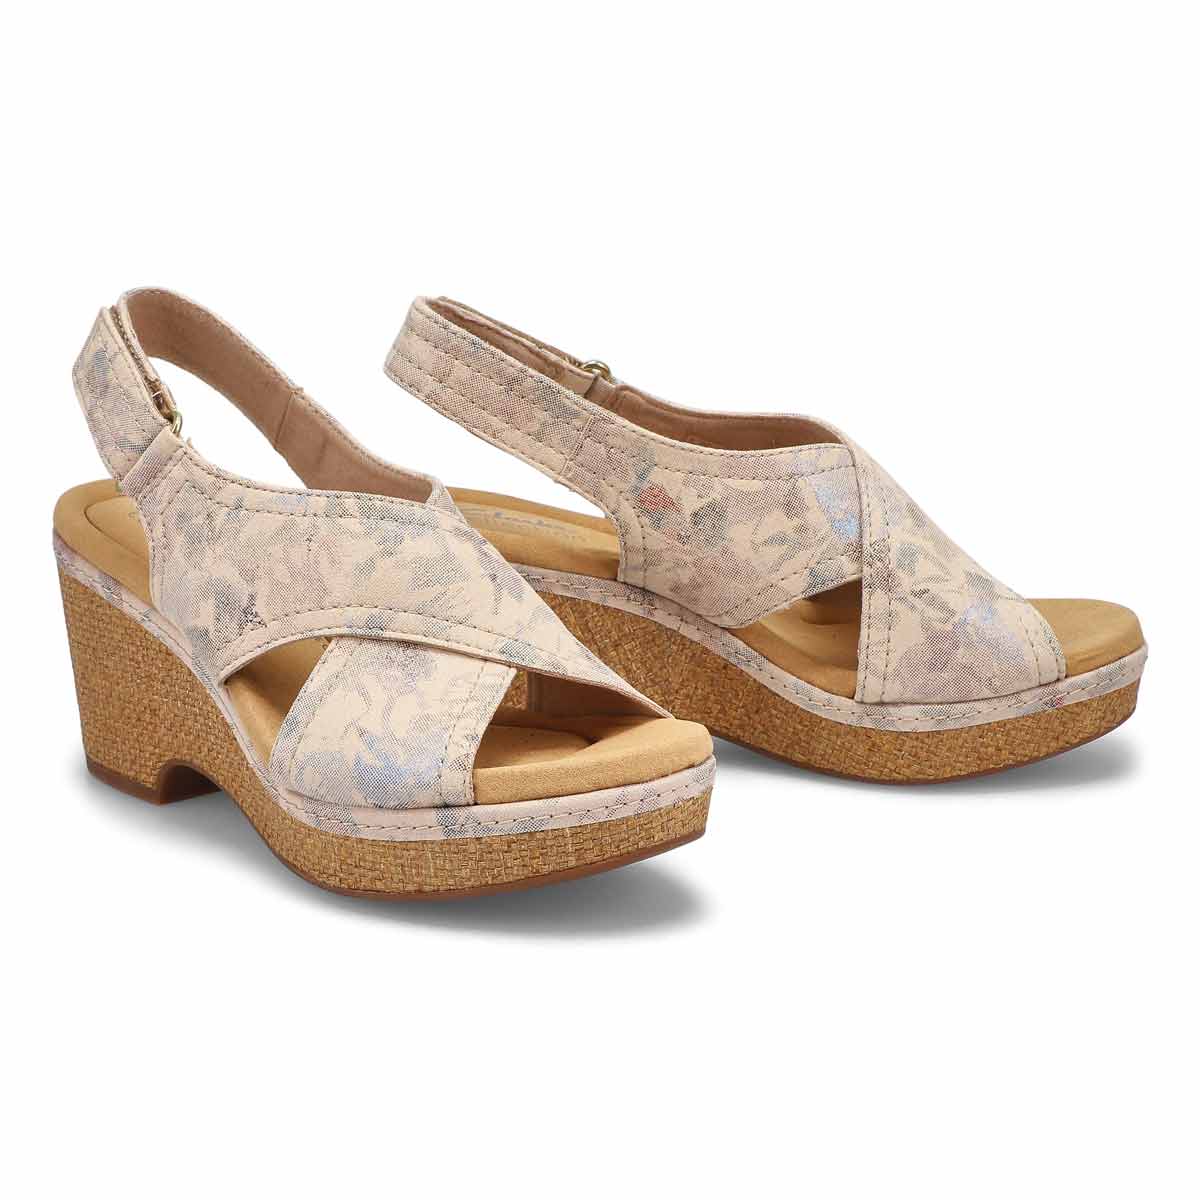 Women's Giselle Cove Wedge Sandal - Floral